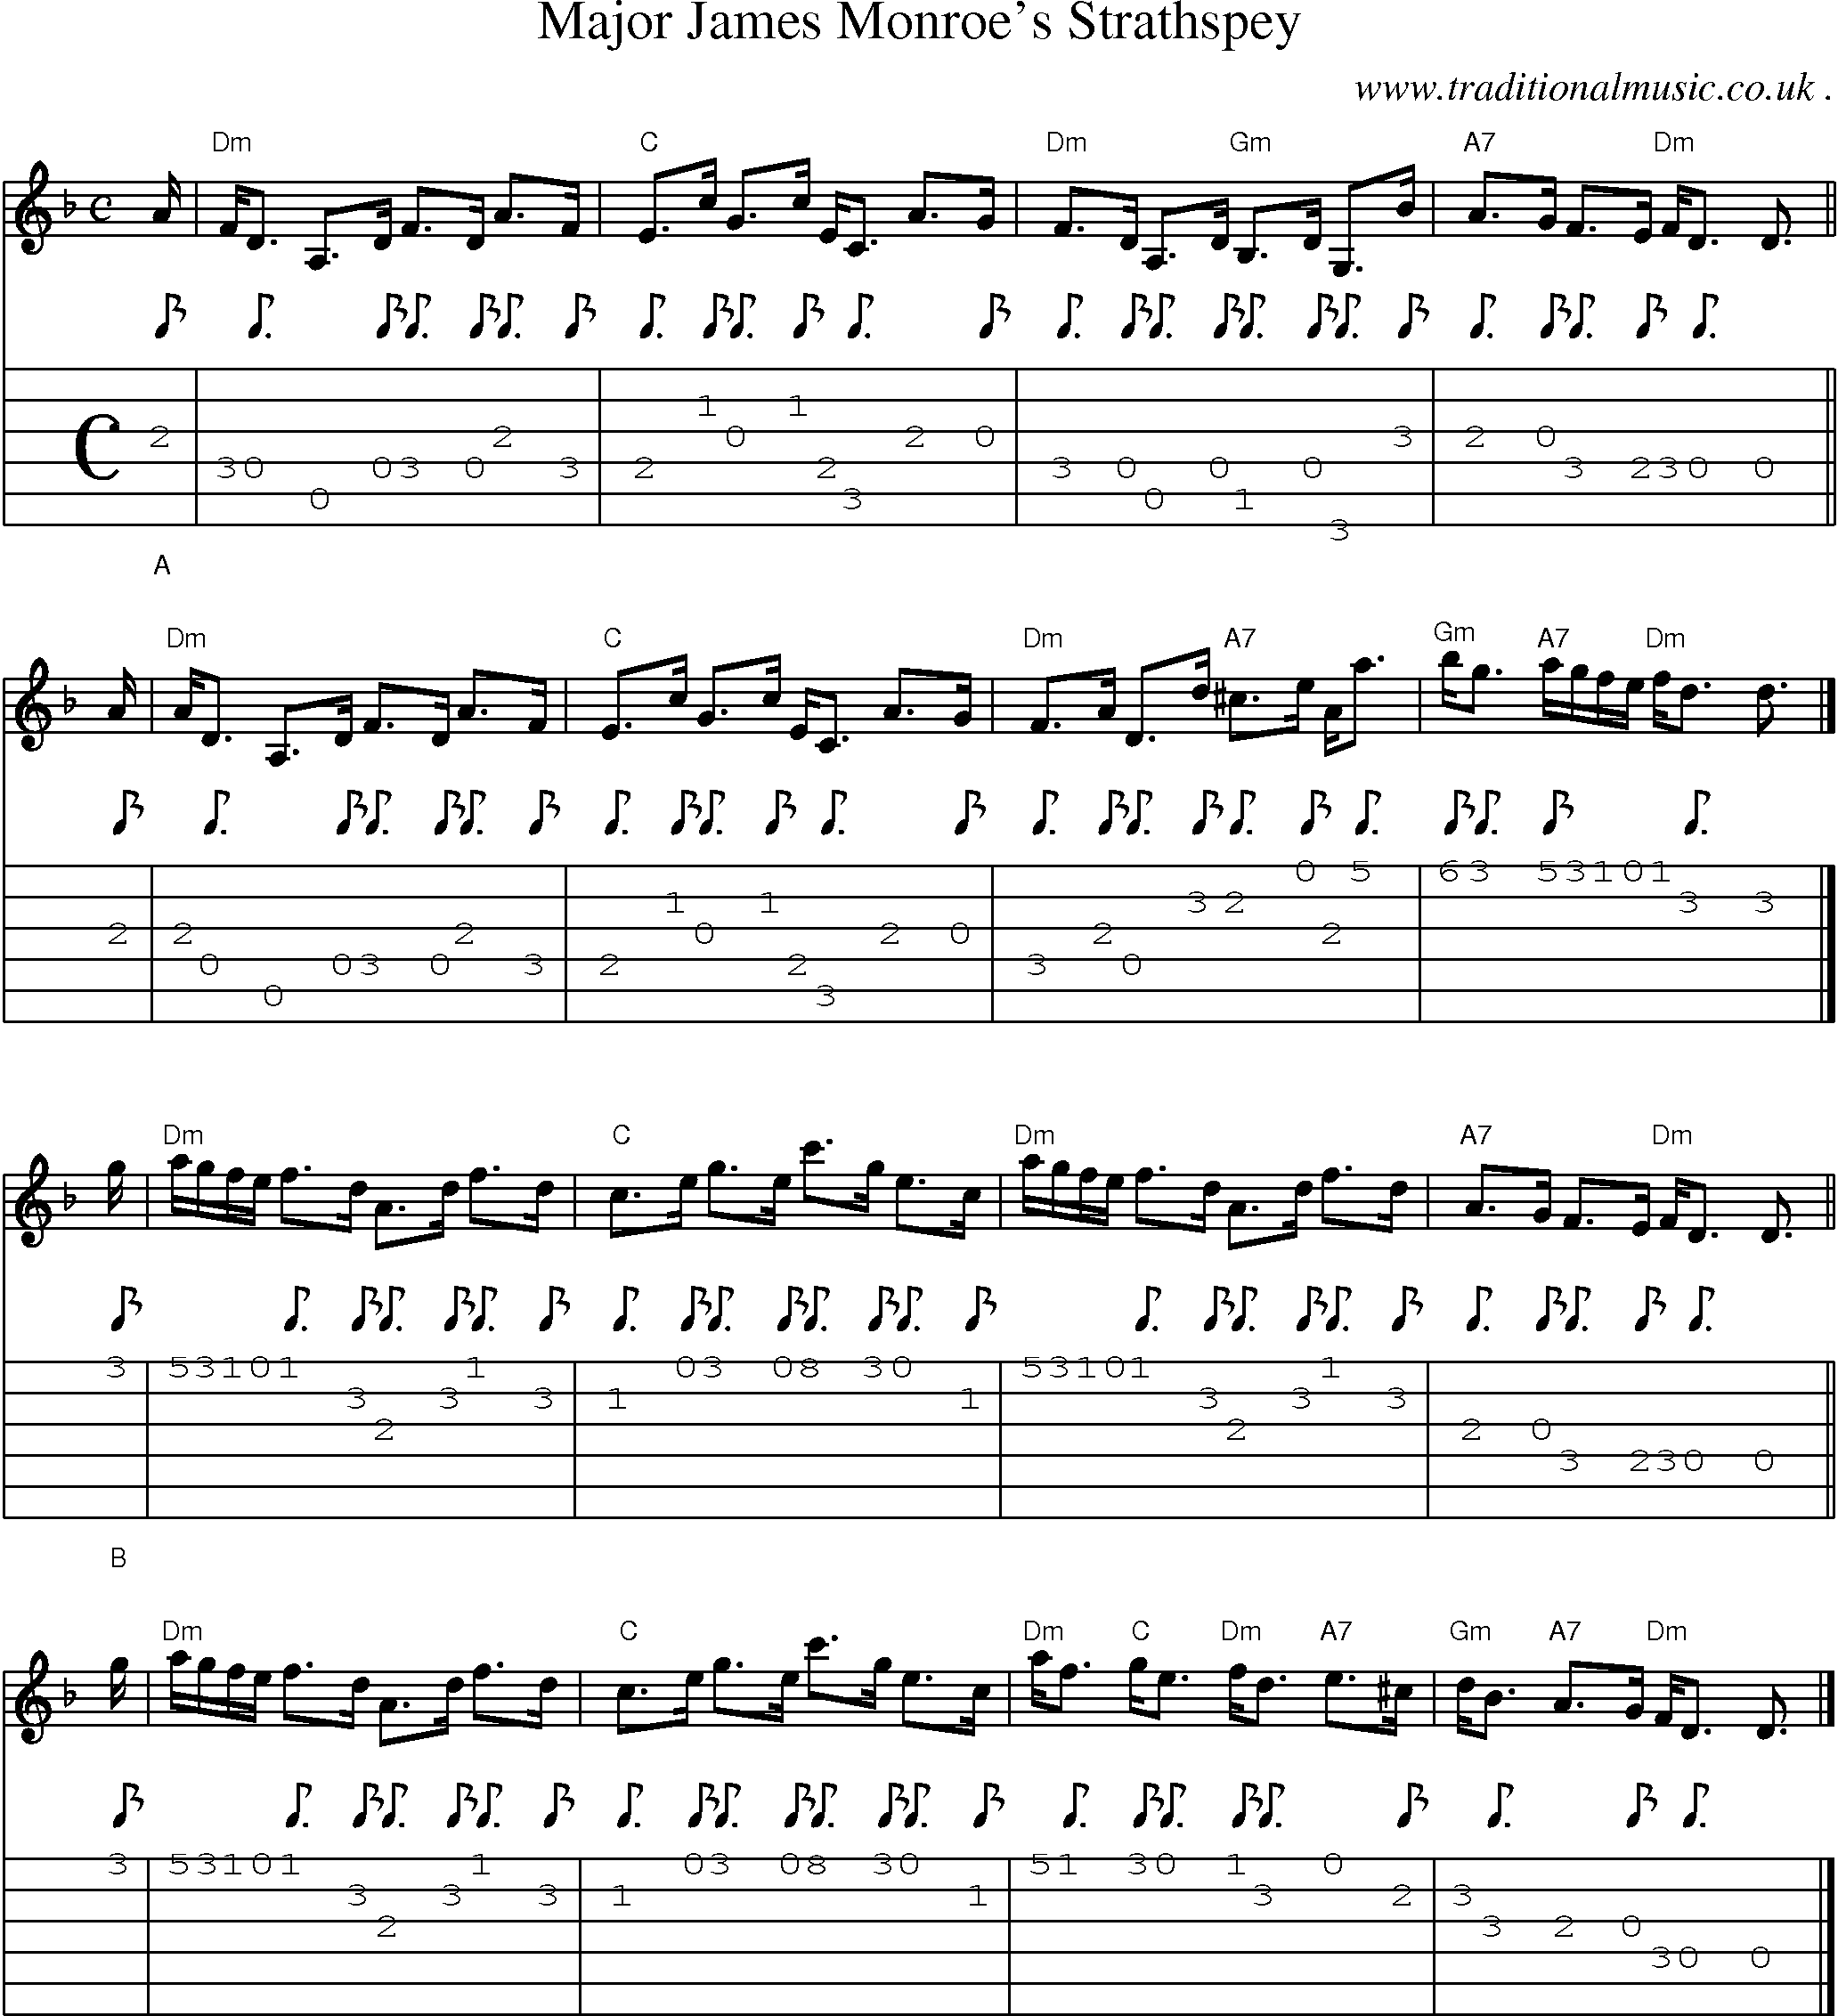 Sheet-music  score, Chords and Guitar Tabs for Major James Monroes Strathspey